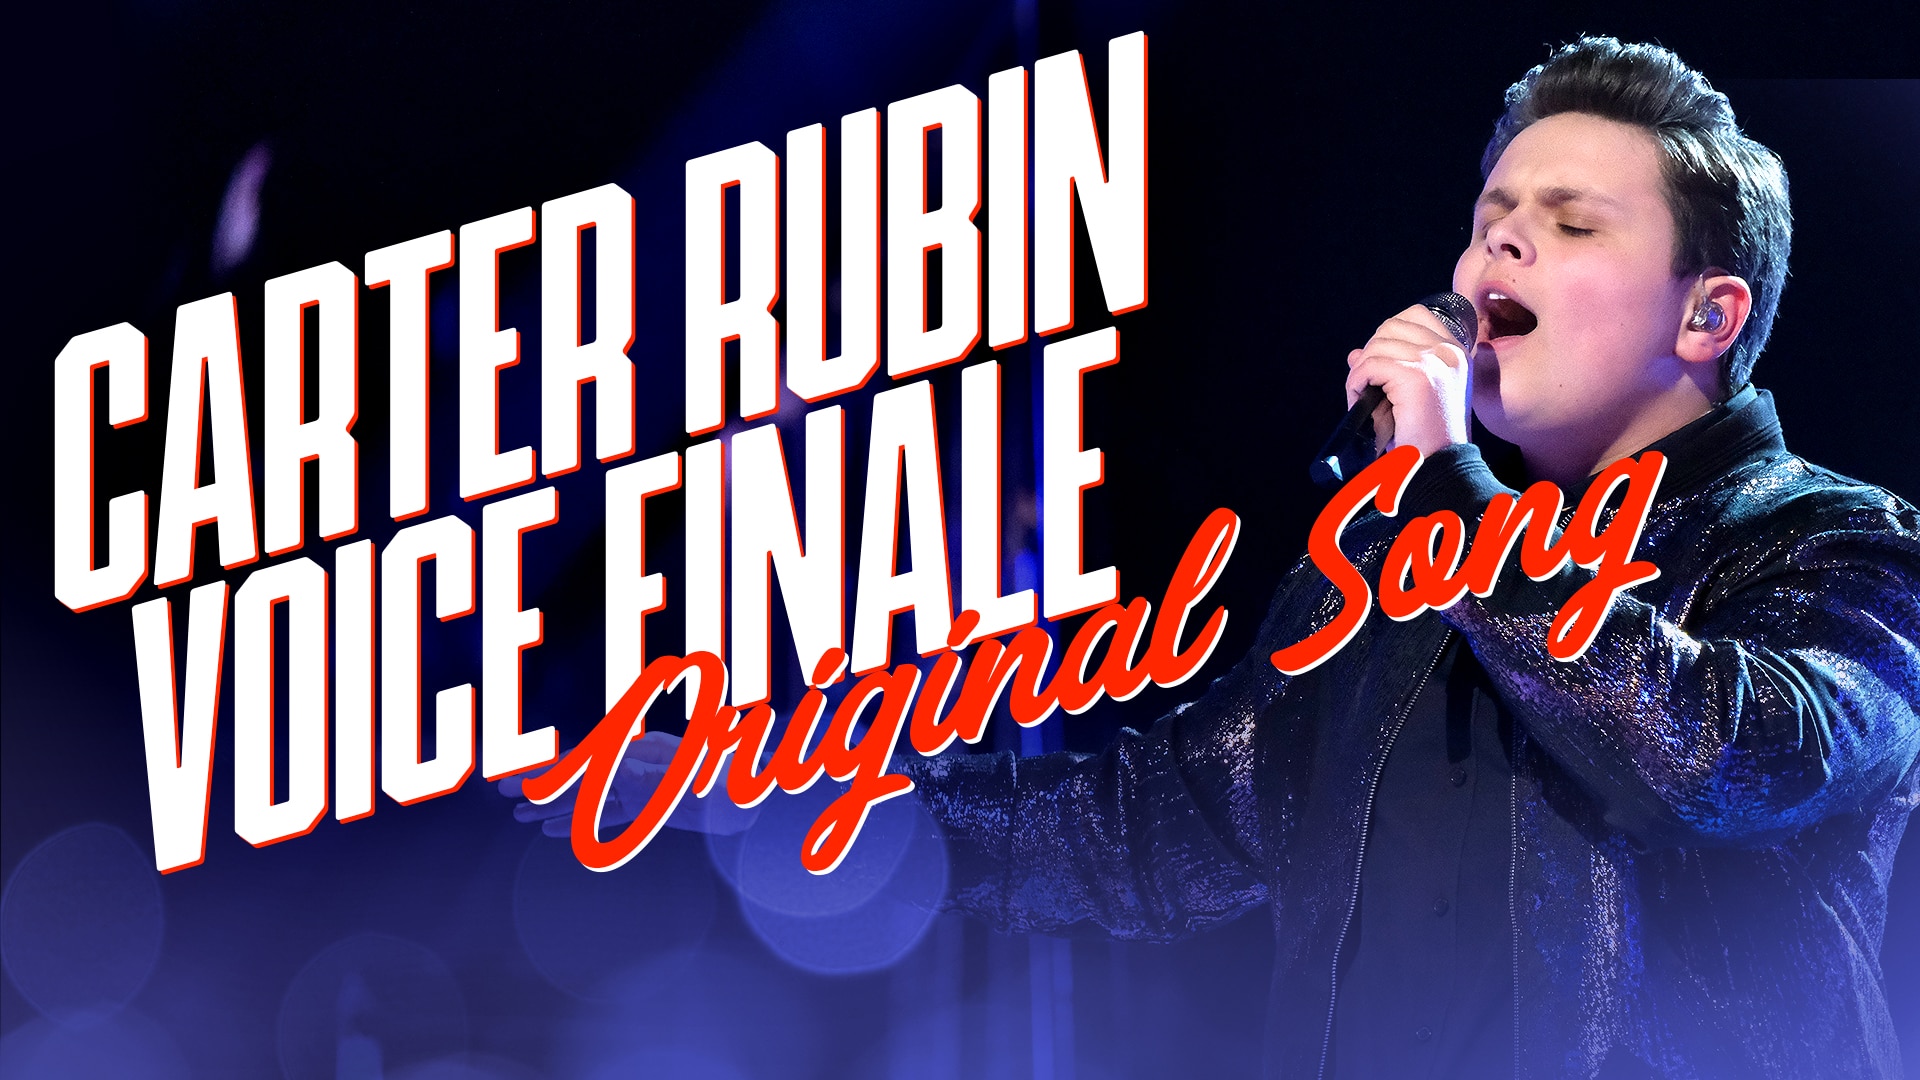 Watch The Voice Highlight: Carter Rubin Sings His Original Song "Up